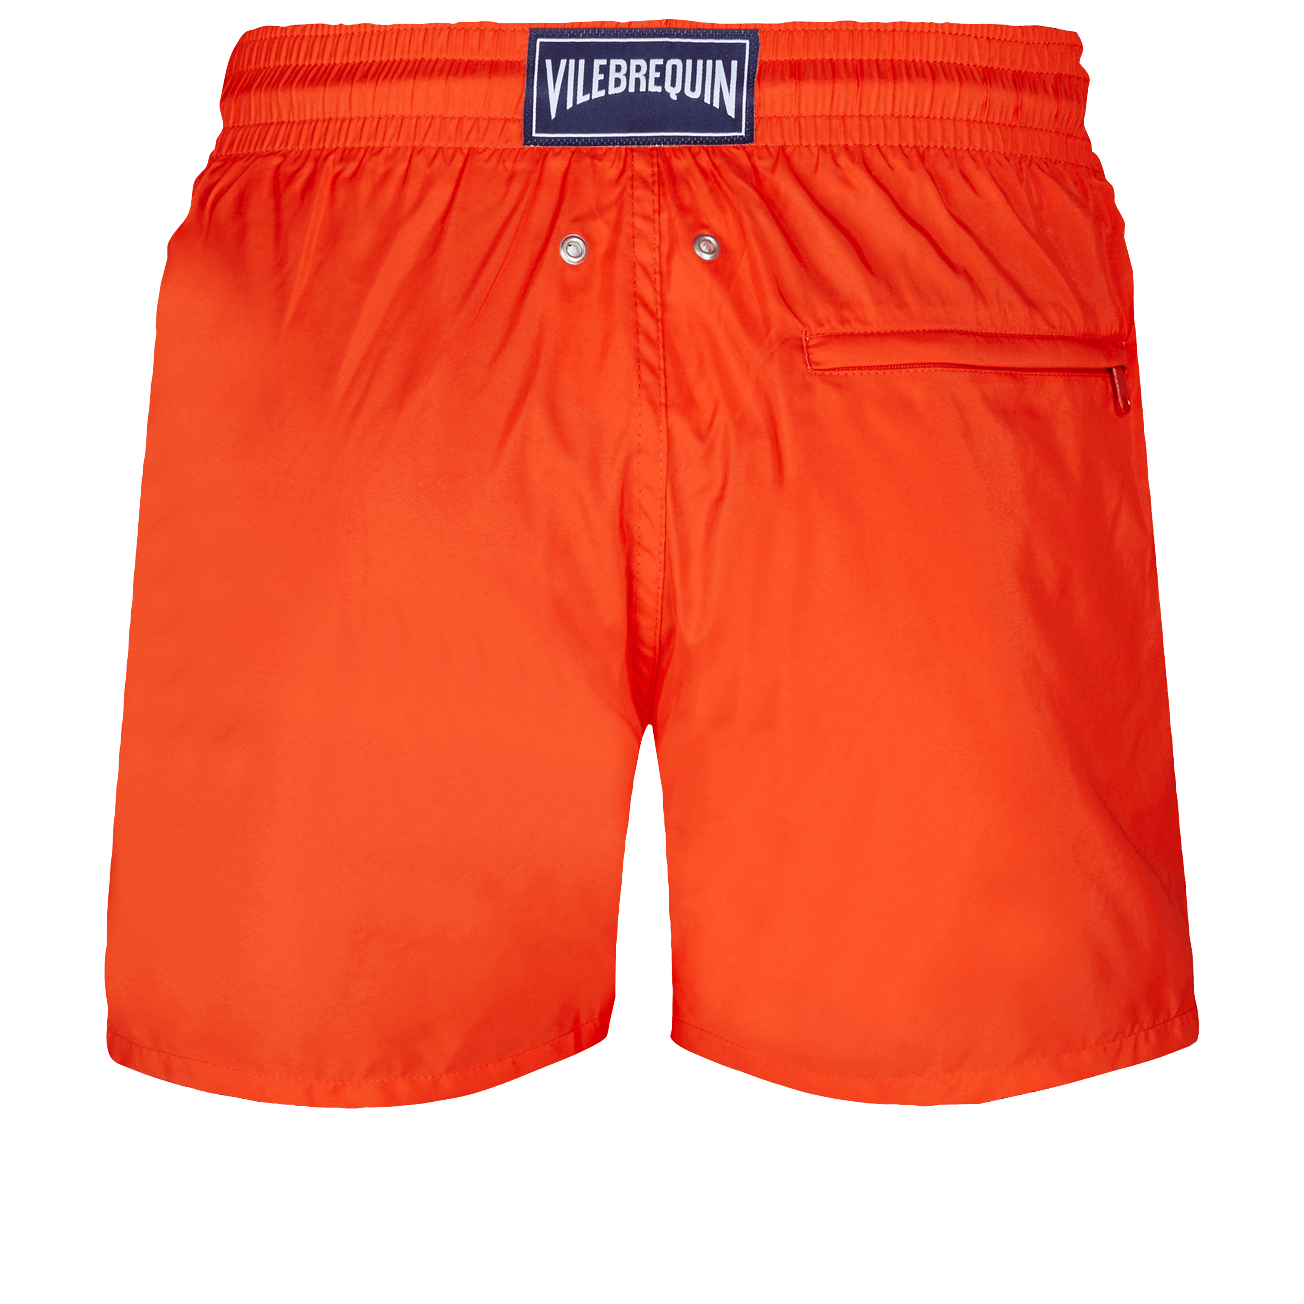 Men Swimwear Ultra-light and packable Solid | Site Vilebrequin | MAHH0I00